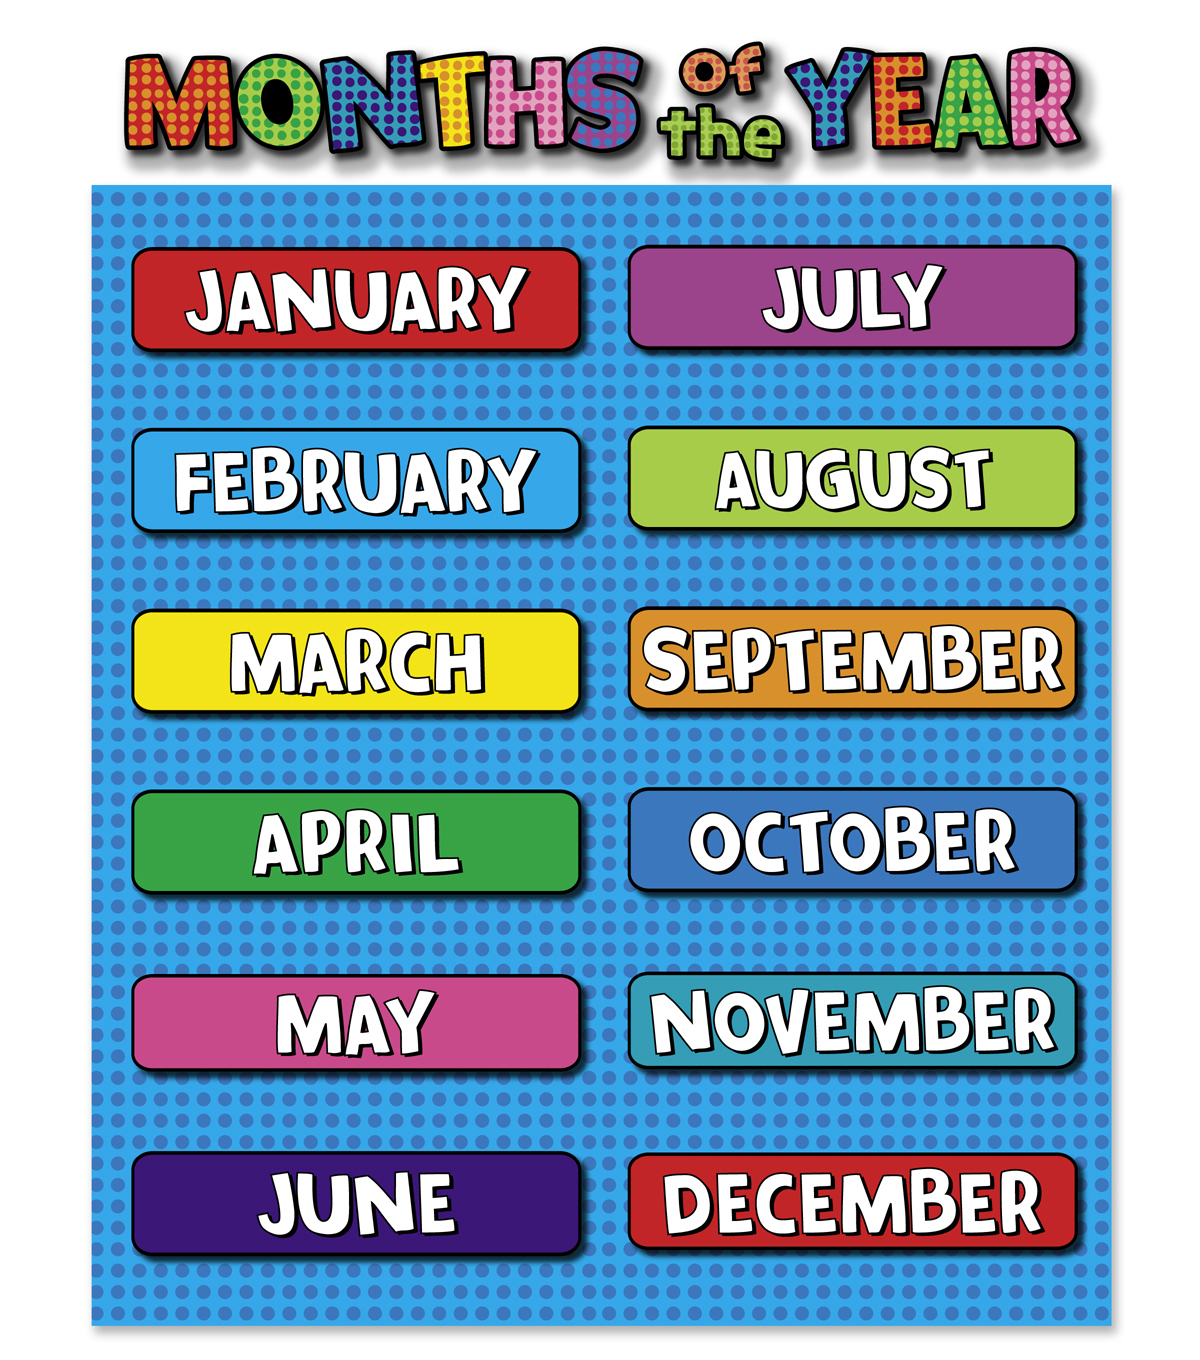 Months of the year for kids. Months of the year. Month для детей. Месяца на английском. Месяцы для детей по английскому.